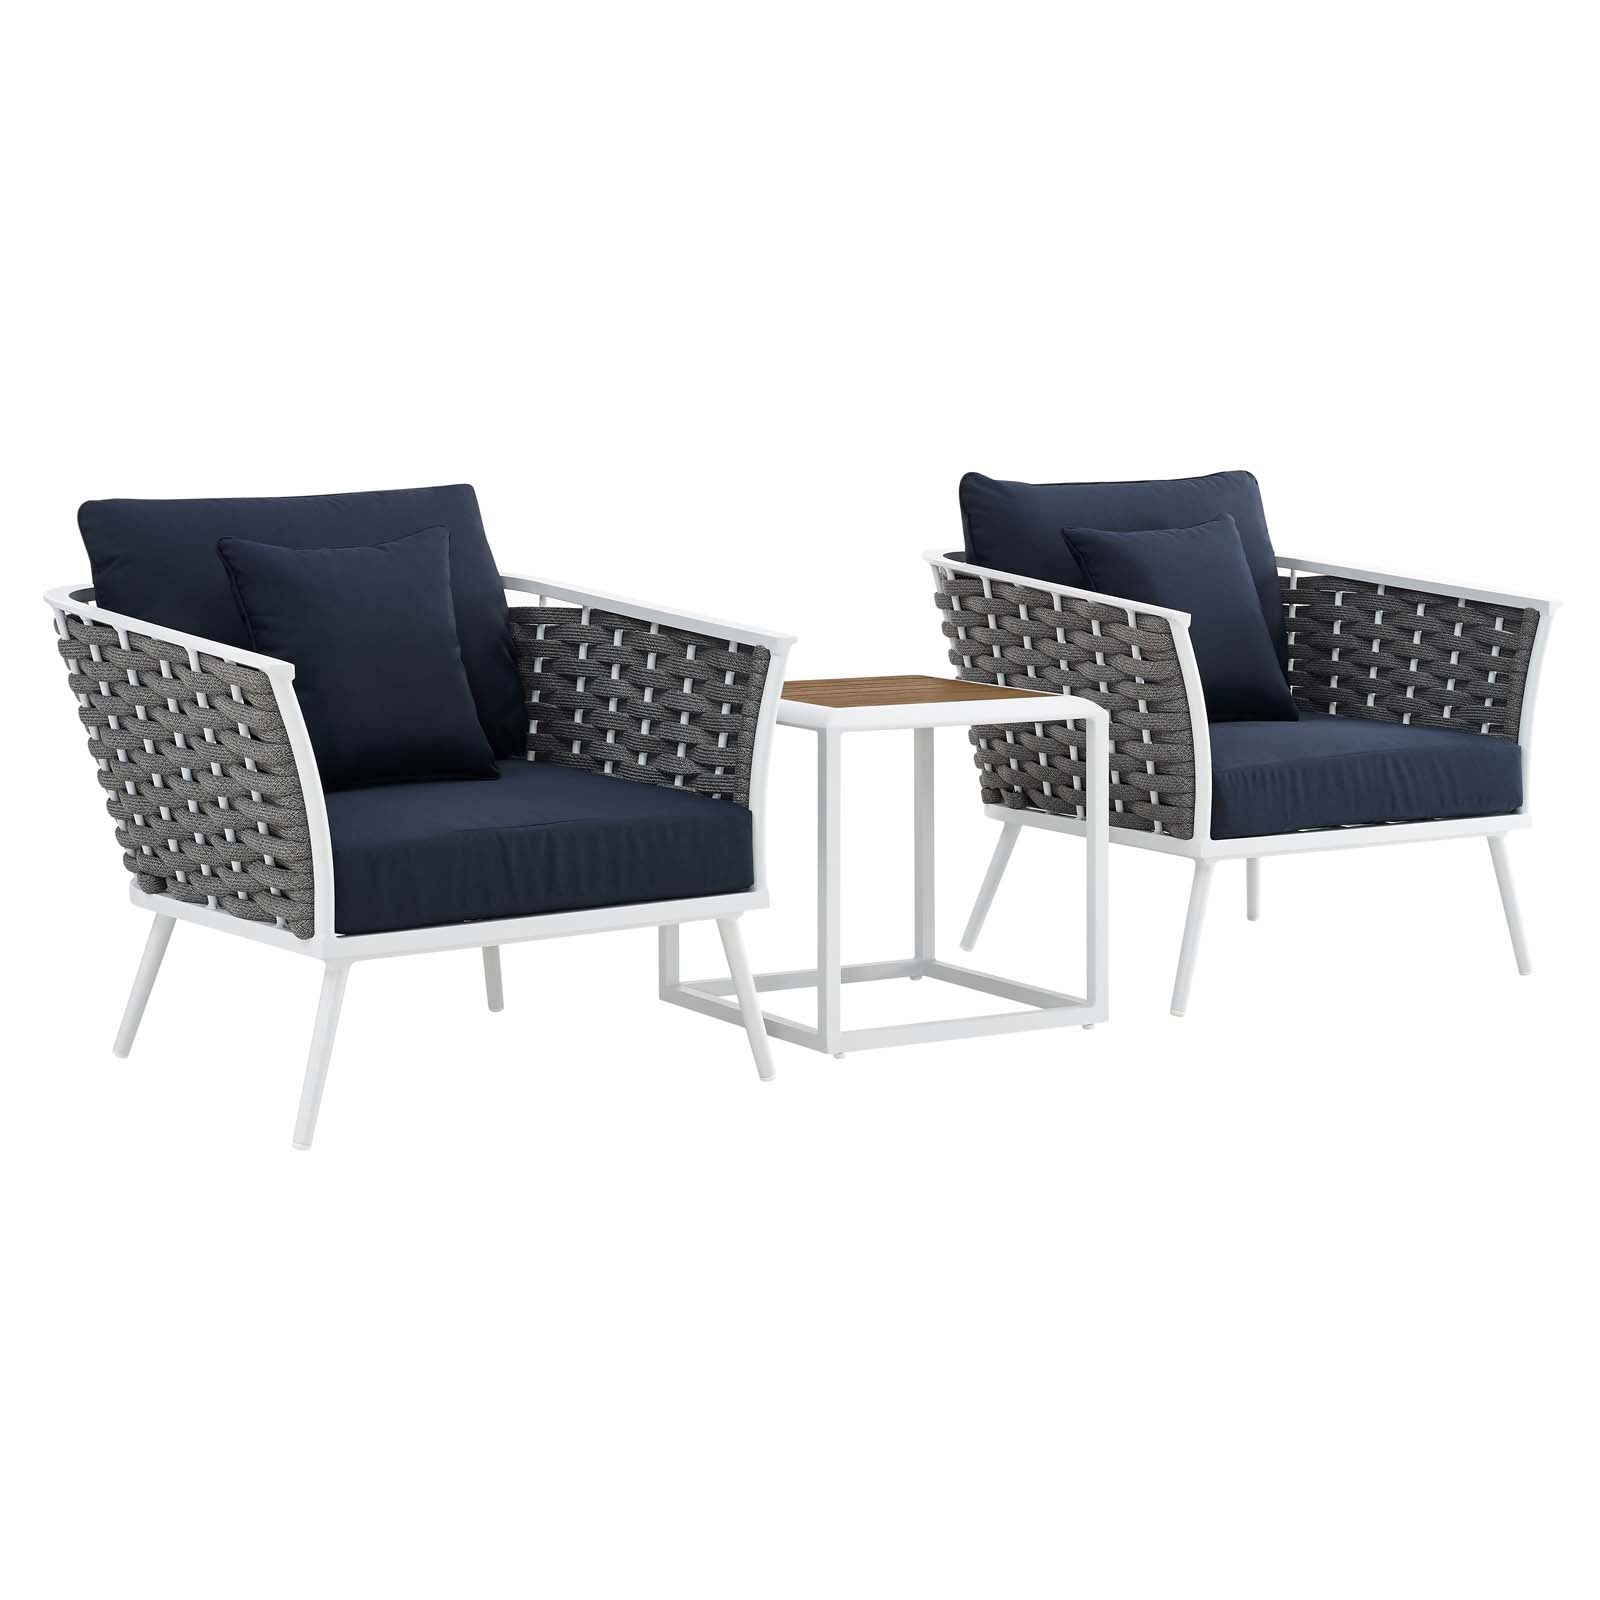 Stance 3 Piece Outdoor 84.5"W Patio Aluminum Sectional Sofa Set White